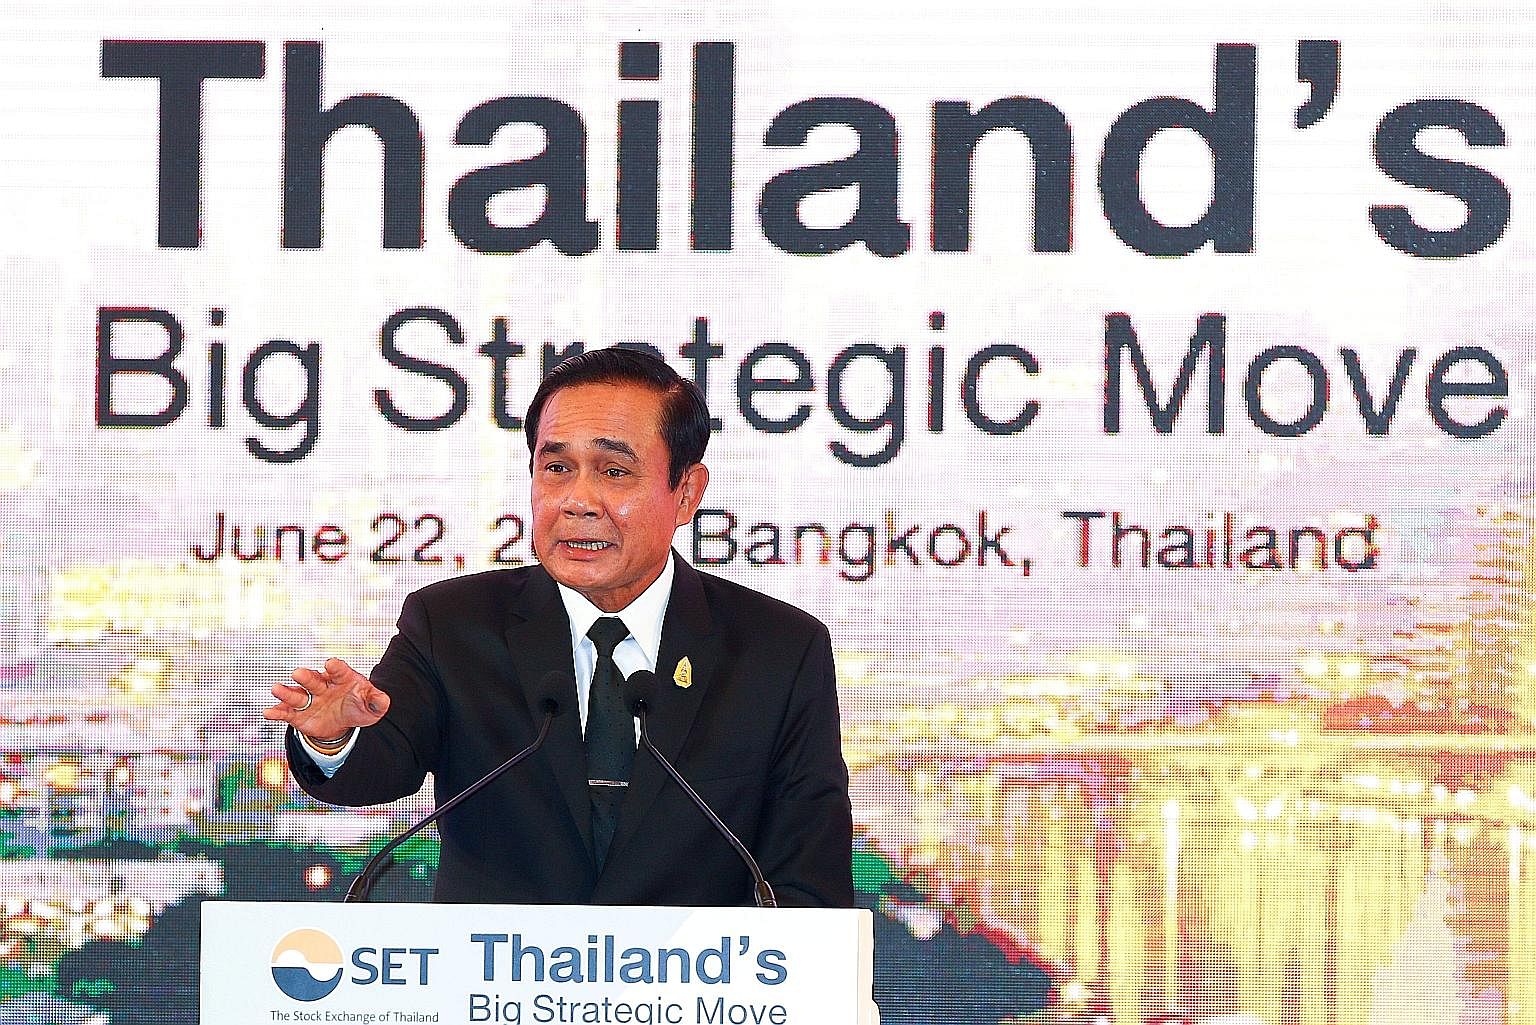 Thai Prime Minister Prayut Chan-o-cha speaking to investors at the Big Strategic Move conference in Bangkok last week. Despite repeated assurances about holding a general election, the four politically charged questions he asked recently and his "50 